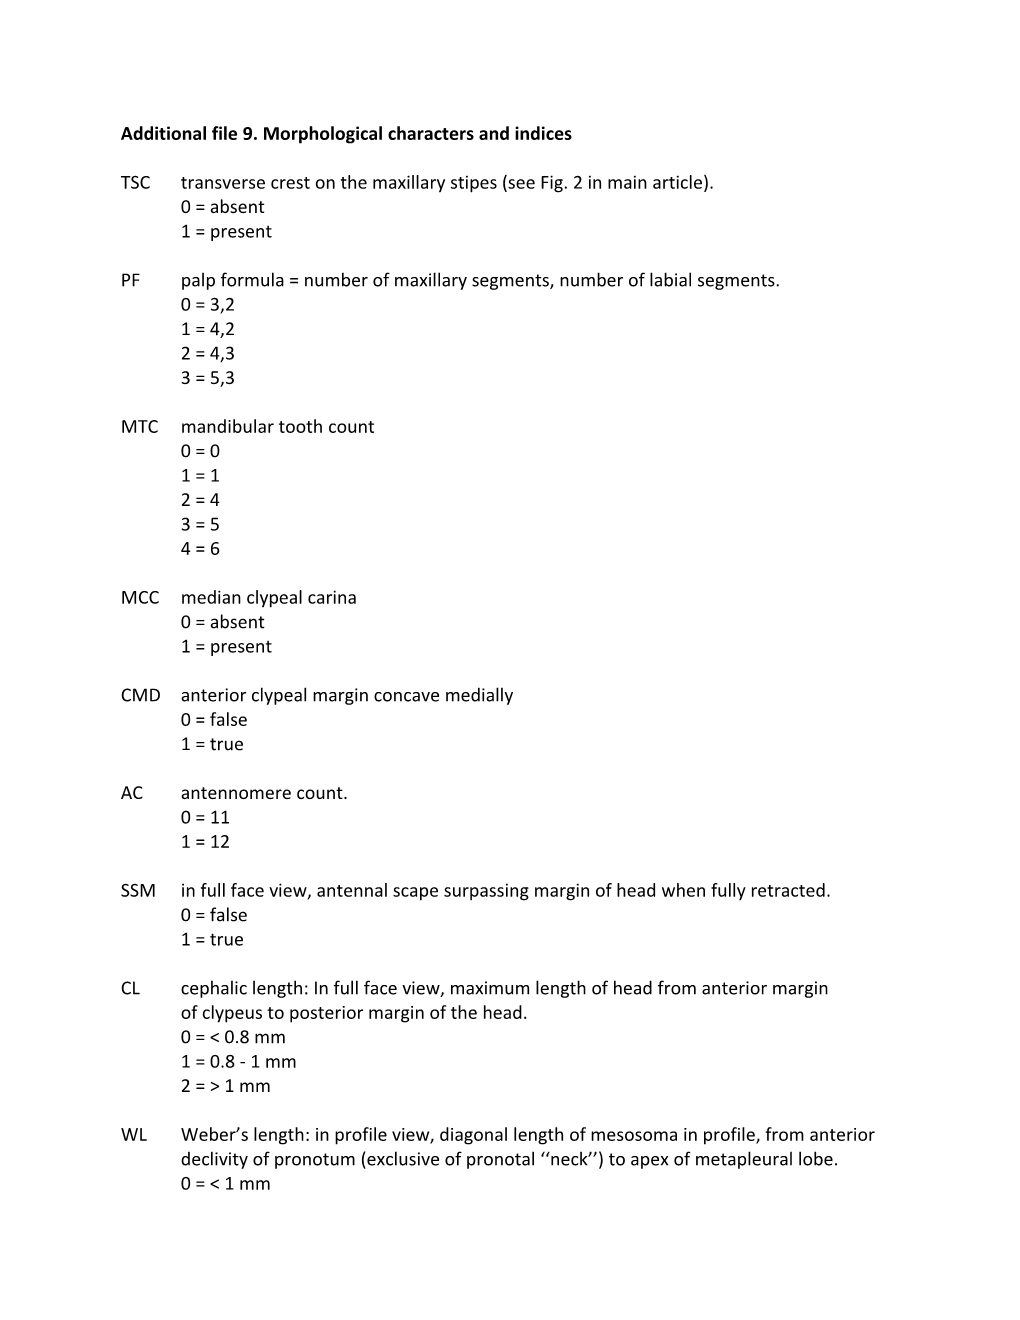 Additional File 9. Morphological Characters and Indices